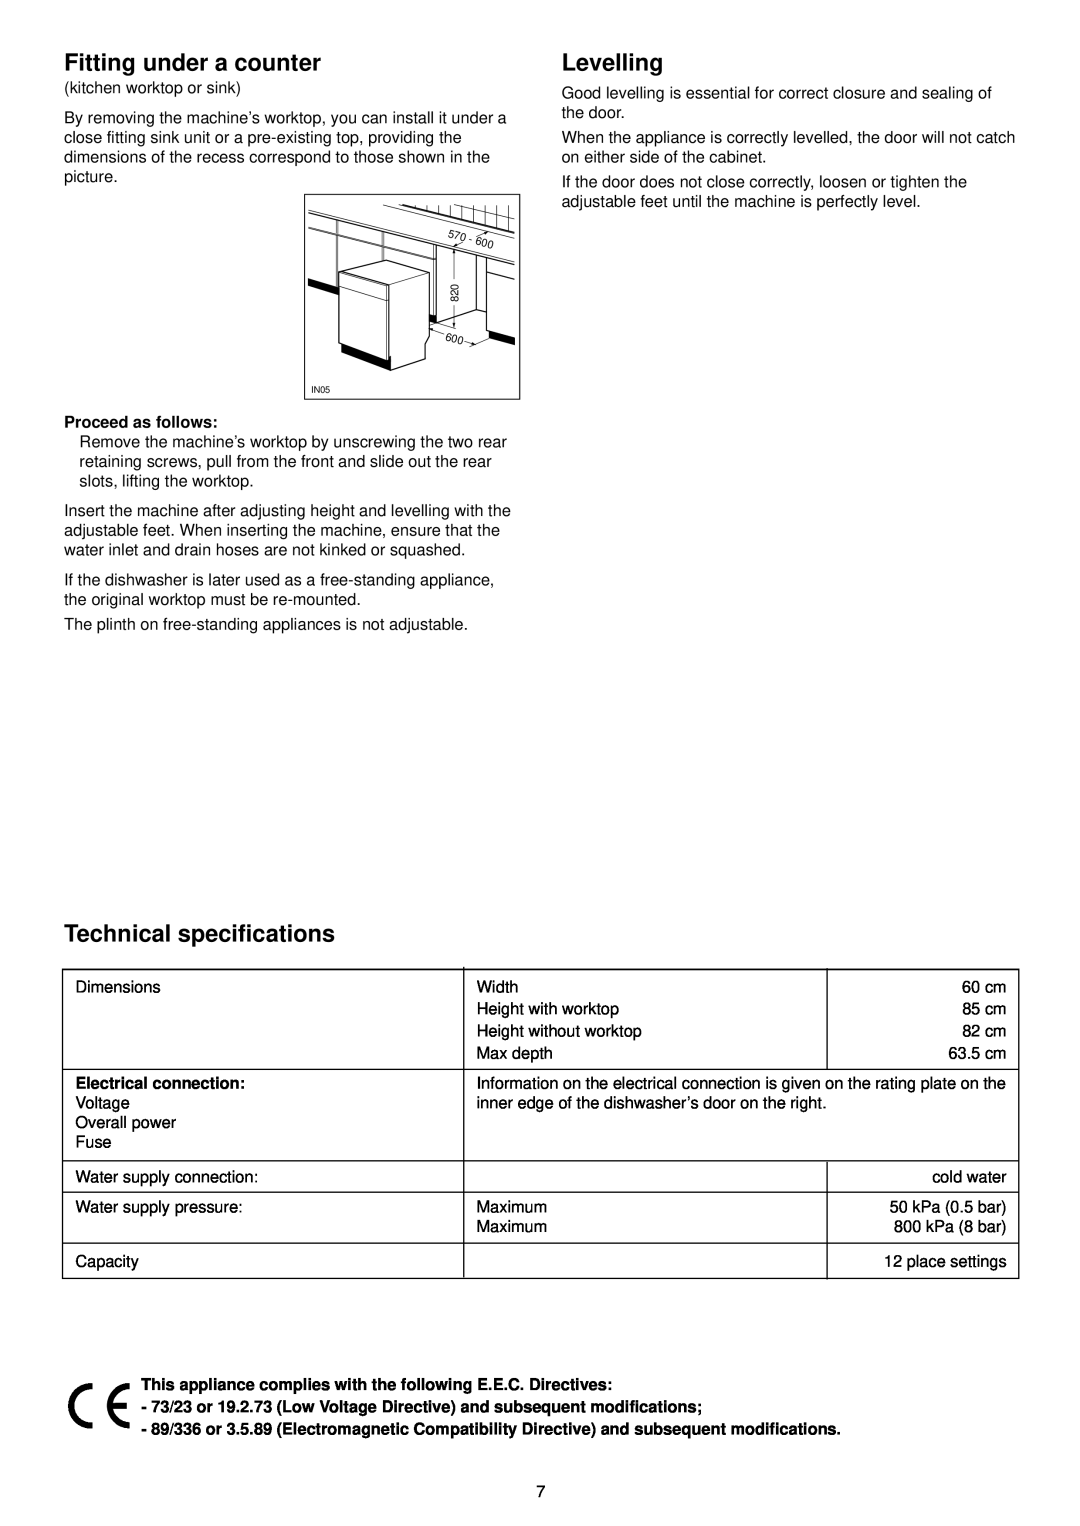 Zanussi DA 6141 D Fitting under a counter, Levelling, Technical specifications, Proceed as follows, Electrical connection 